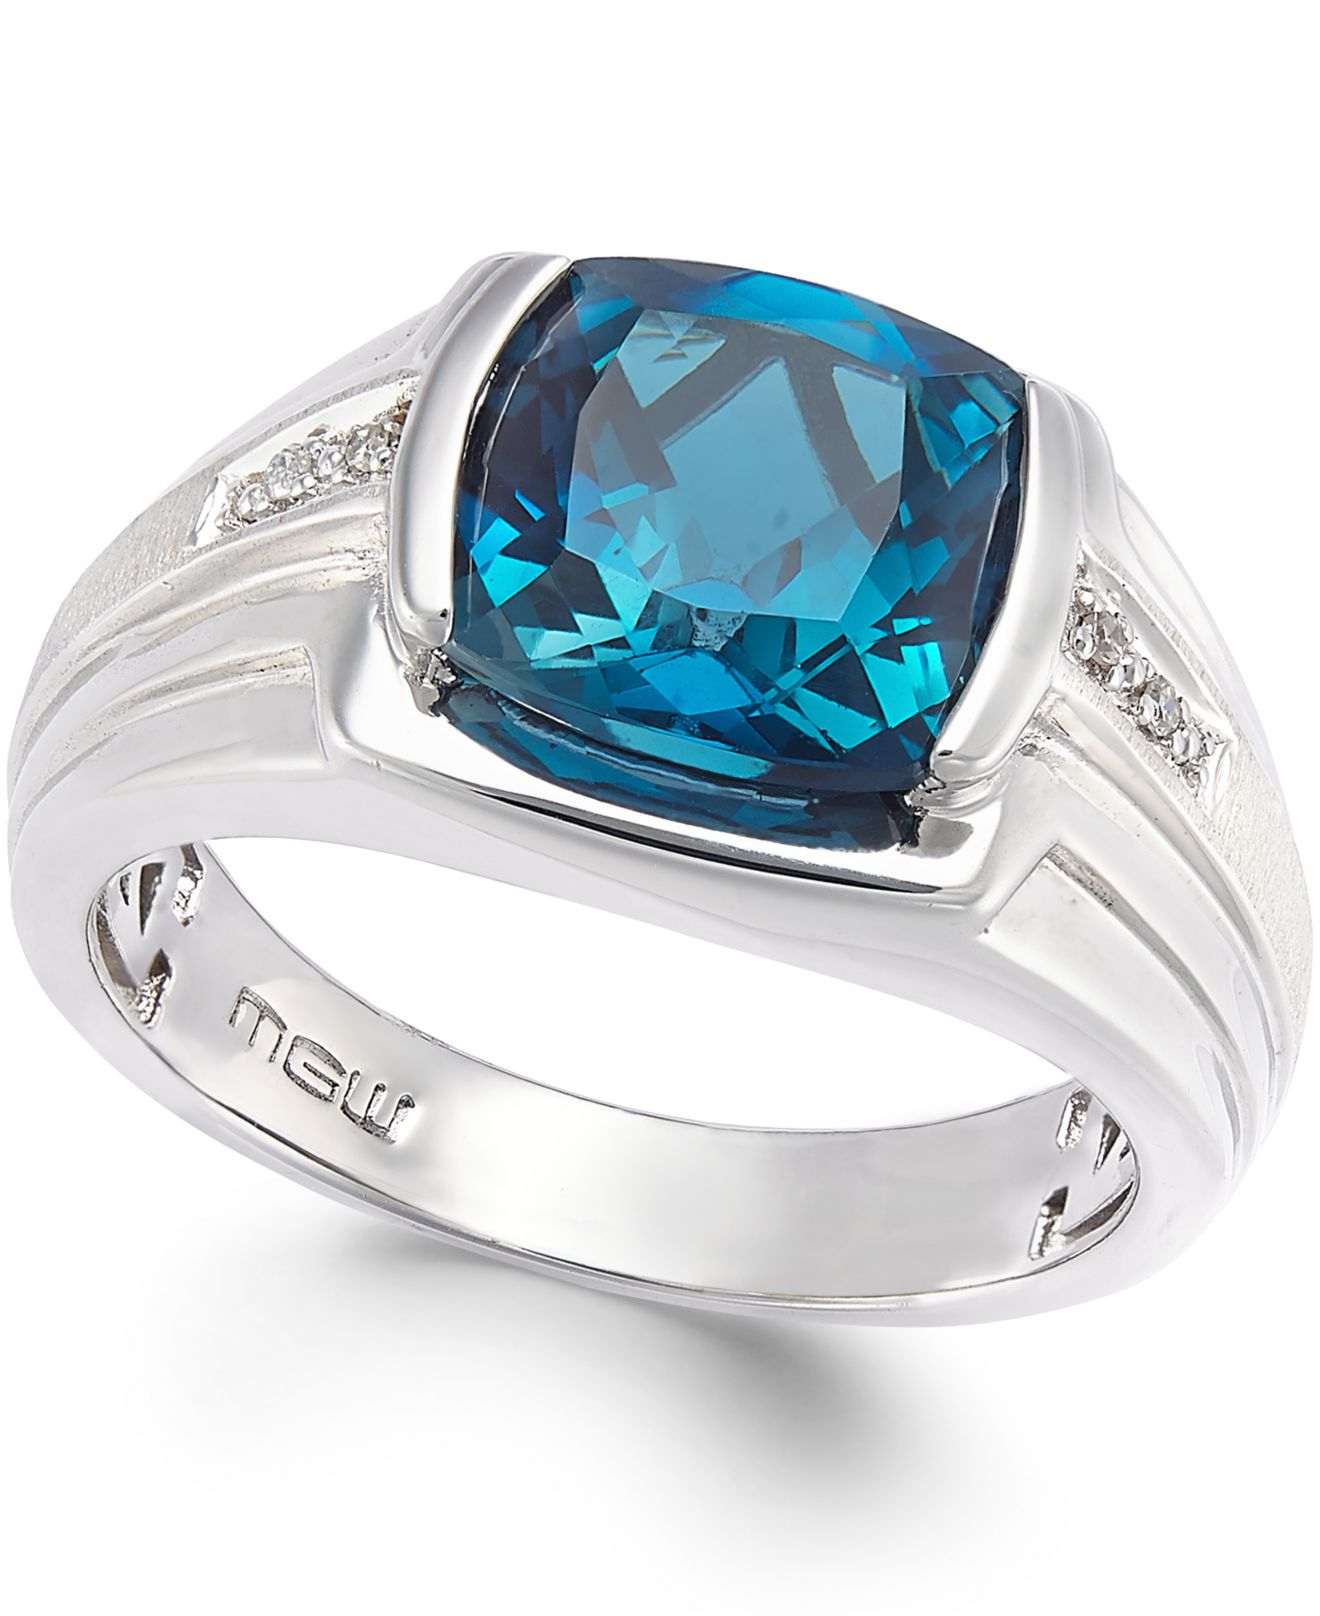 Macy's Men's Blue Topaz (5 Ct. T.w.) And Diamond Accent Ring In